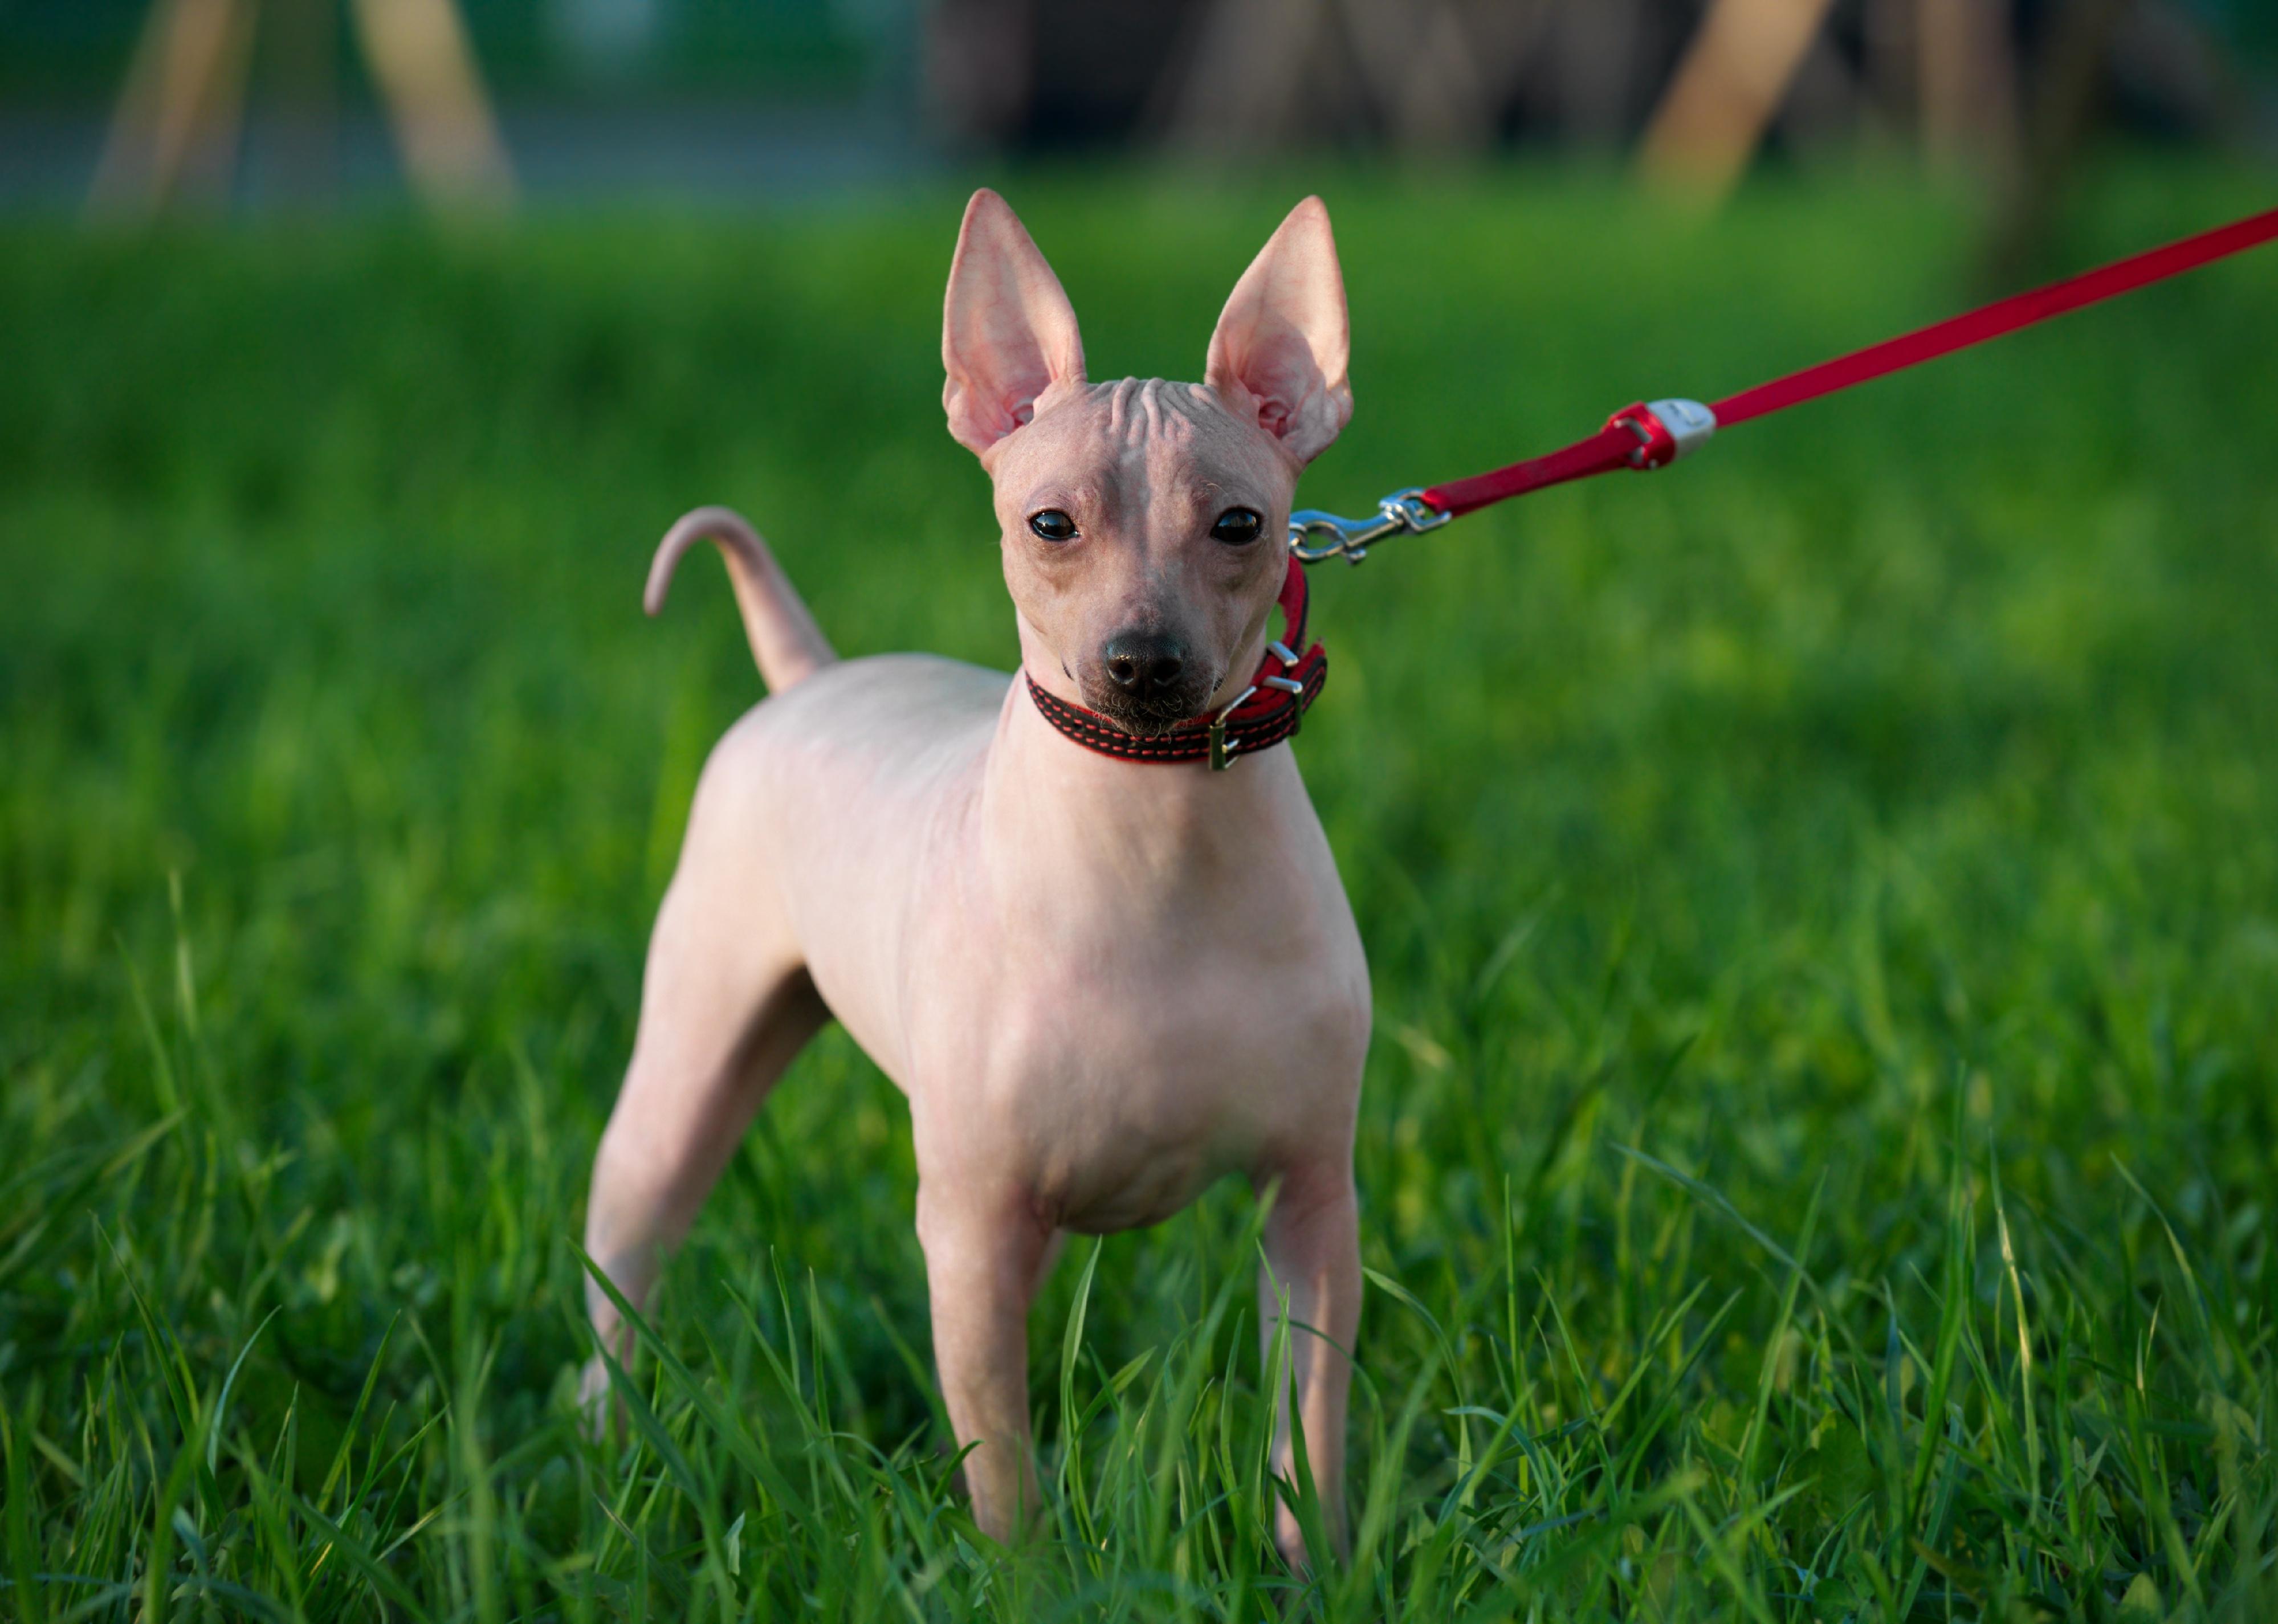 American Hairless Terrier with red leash standing on green lawn background in evening light.